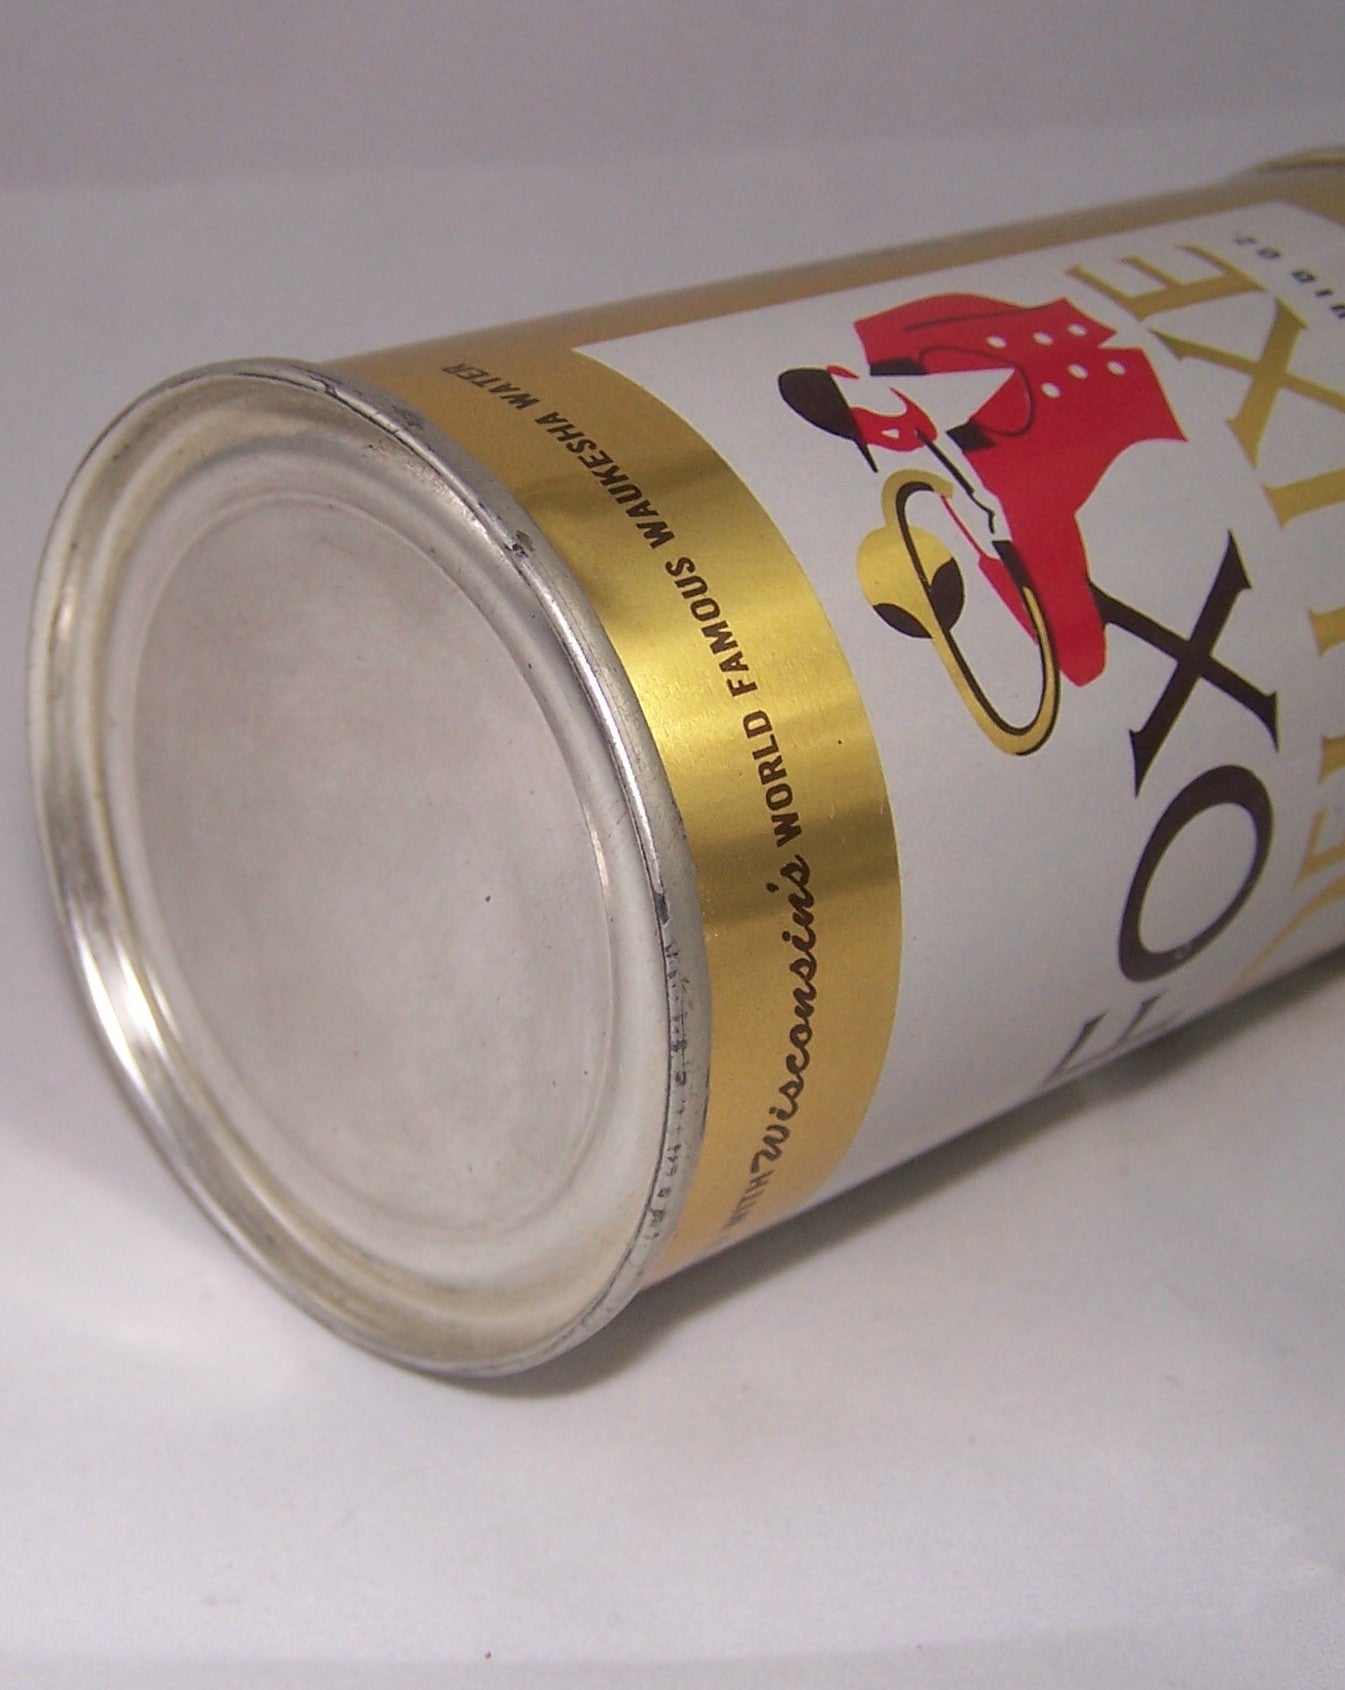 Fox Deluxe Beer, USBC 65-24, Rolled can, Grade A1+ Sold 5/3/15